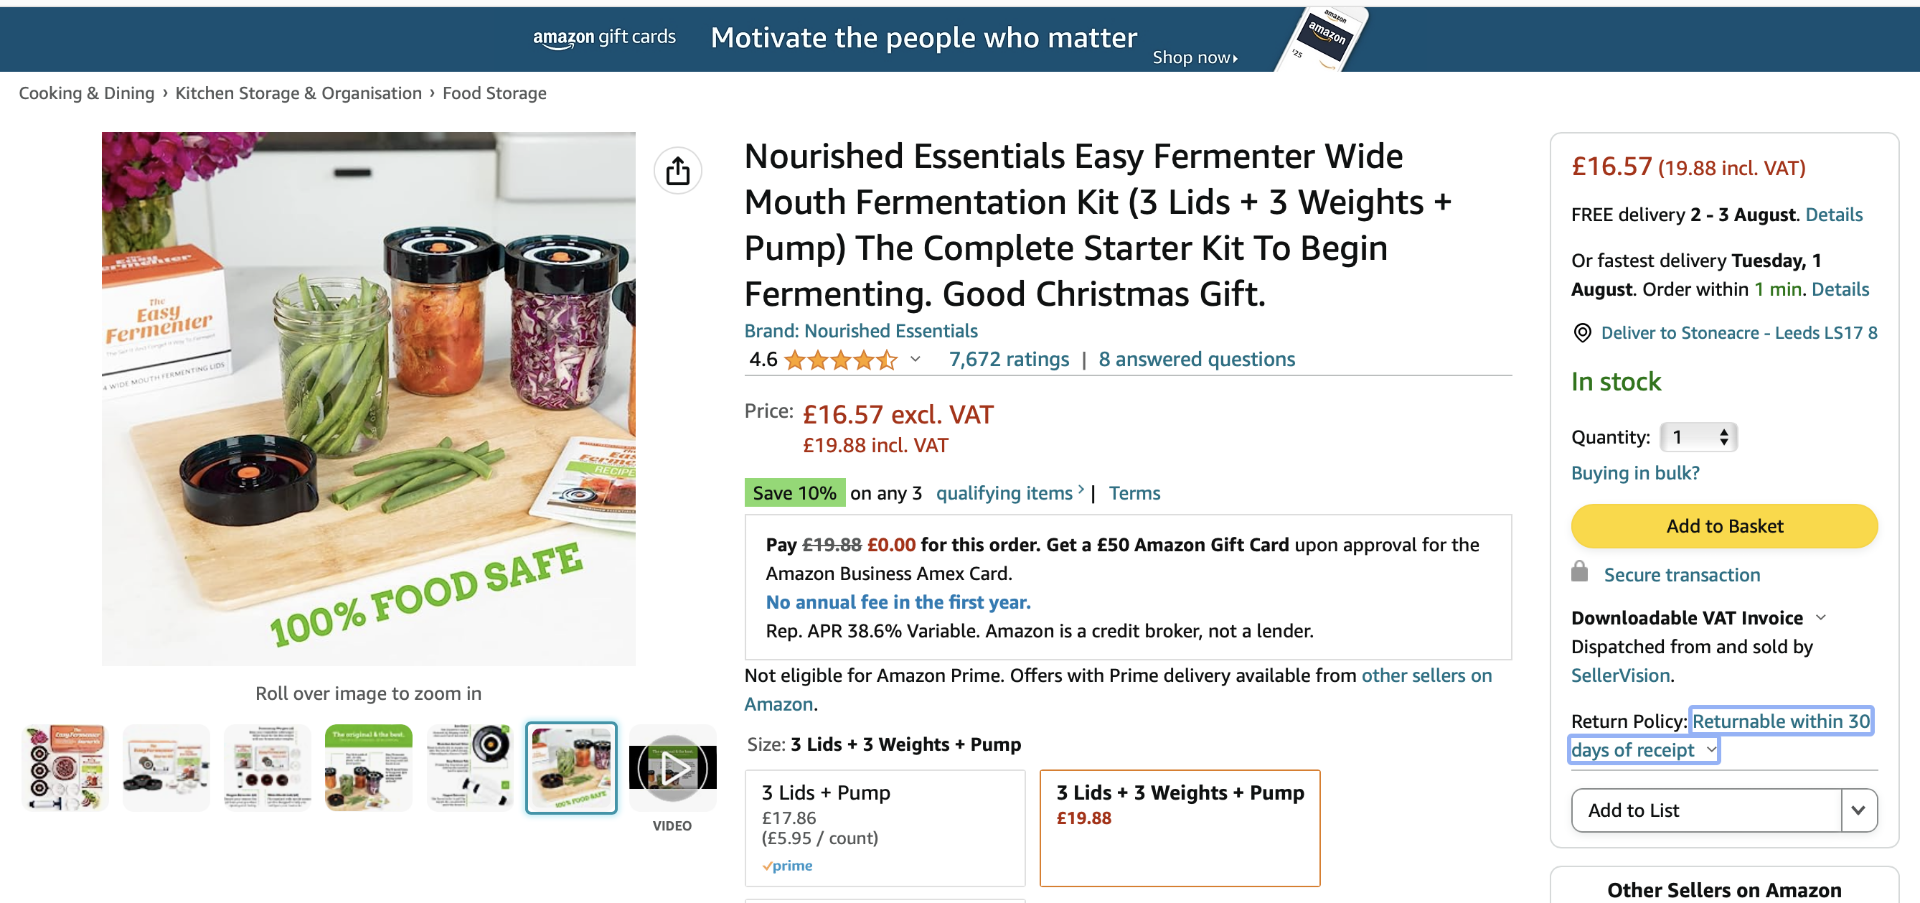 5 x Nourished Essentials Easy Fermenter Wide Mouth Fermentation Kit (3 Lids + 3 Weights + Pump) The  - Image 2 of 5